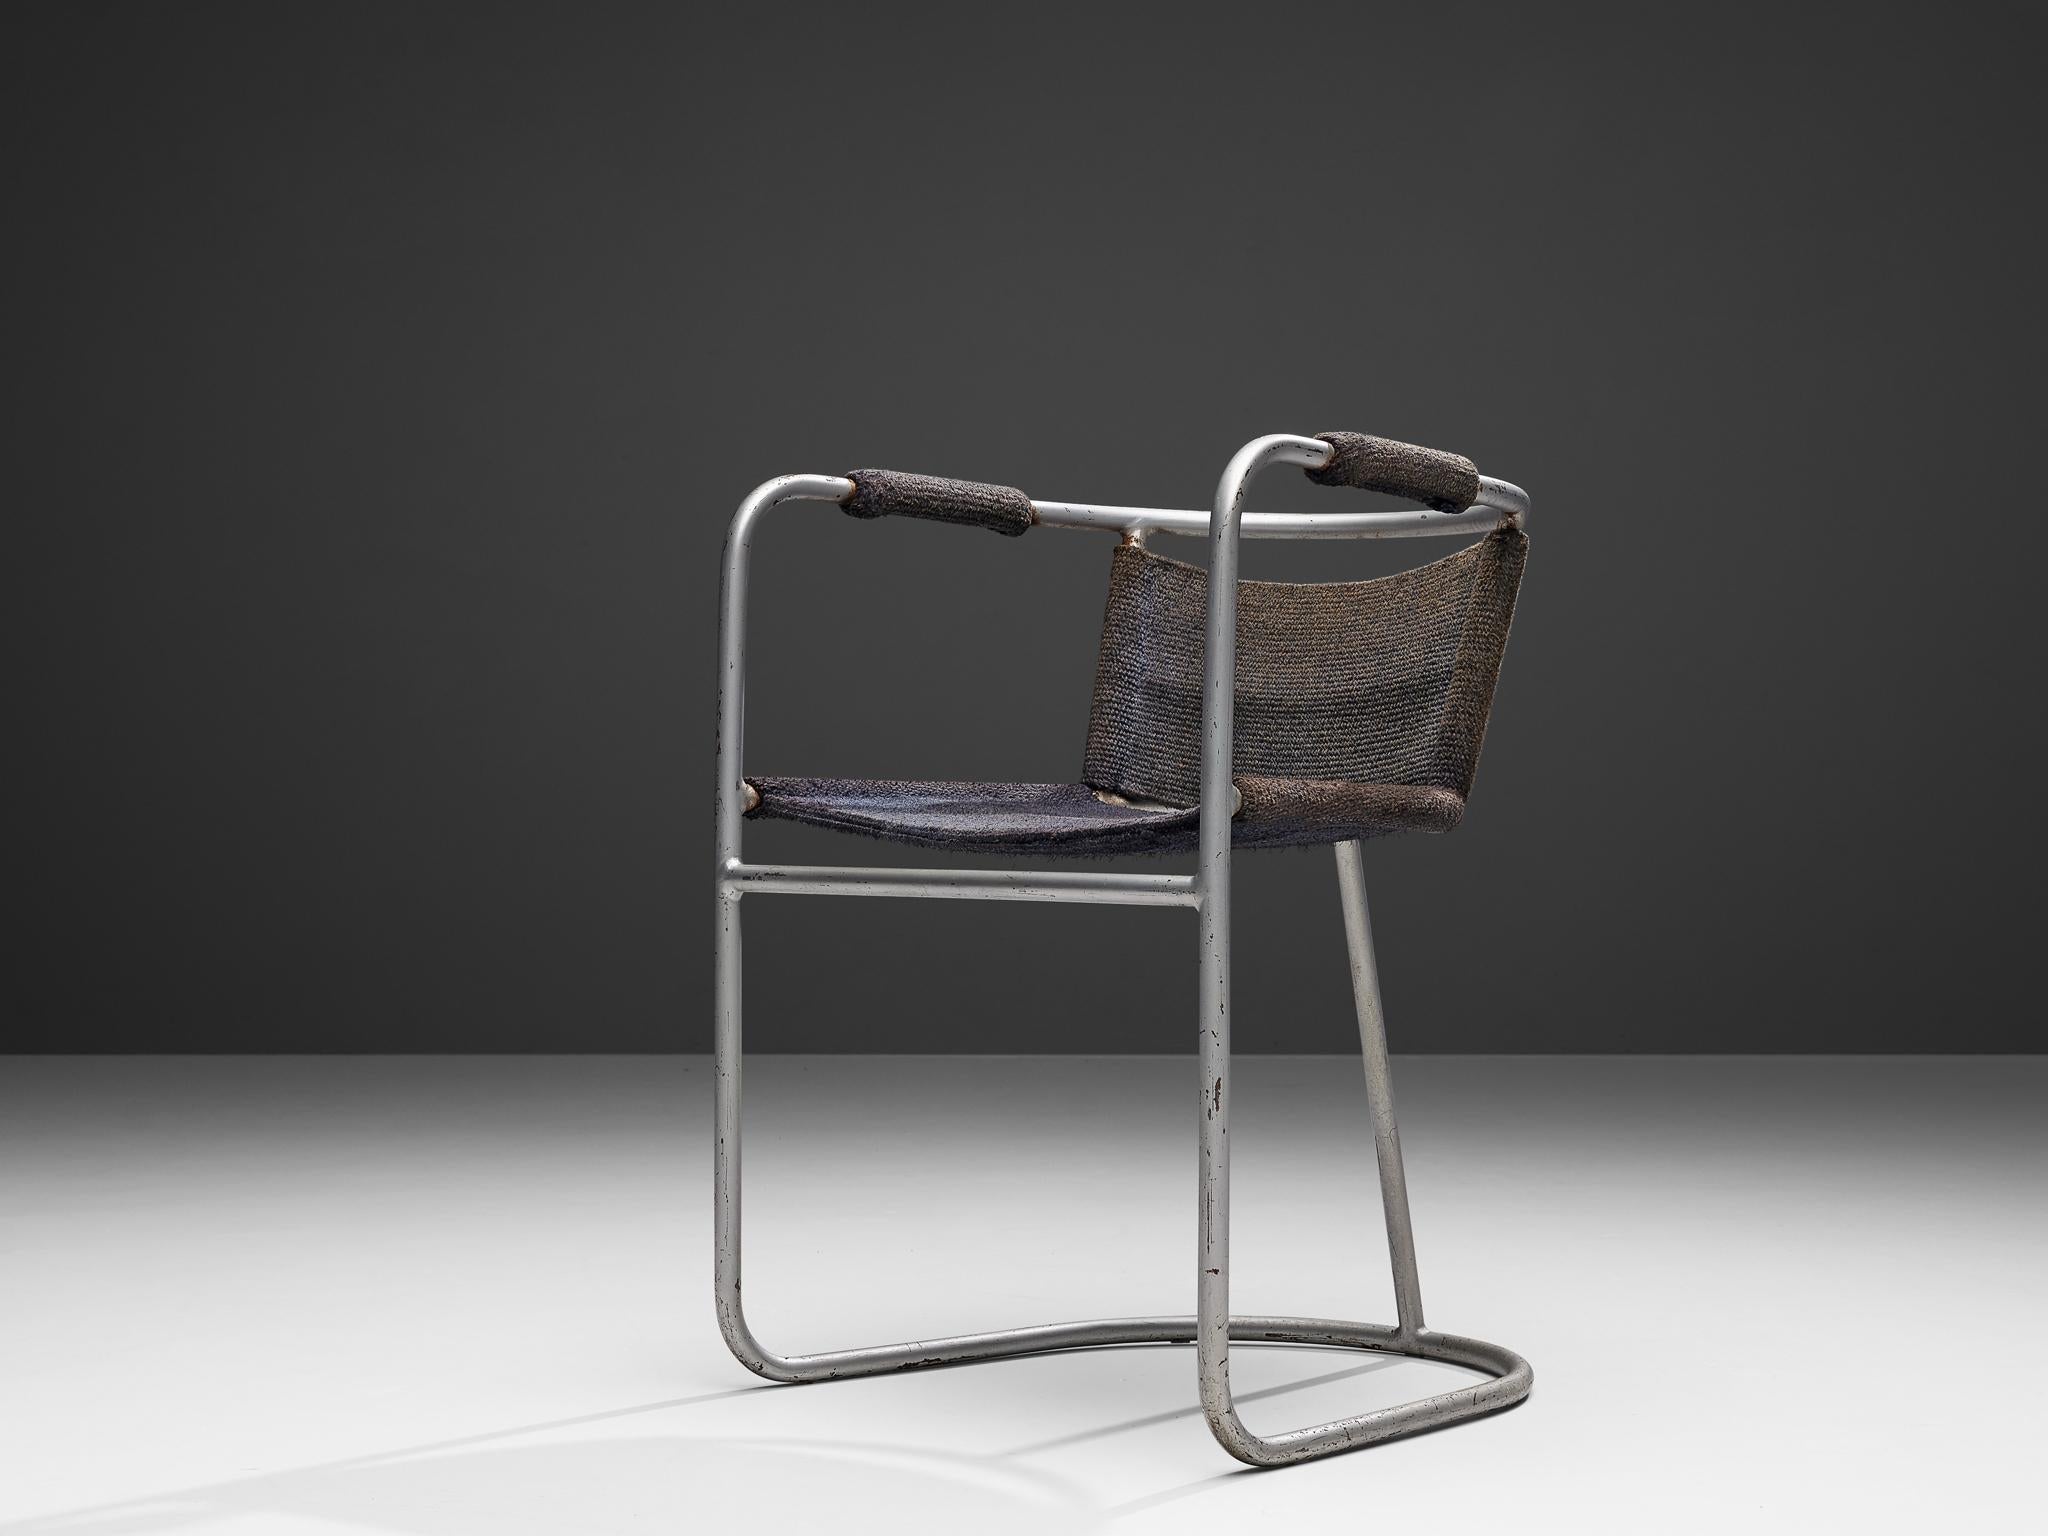 Bas Van Pelt, armchair, chrome-plated steel, sisal, The Netherlands, 1930s

This armchair is designed by Bas Van Pelt and shows a bent tubular metal frame. This early version shows that the development of the cantilever chair was at its beginning